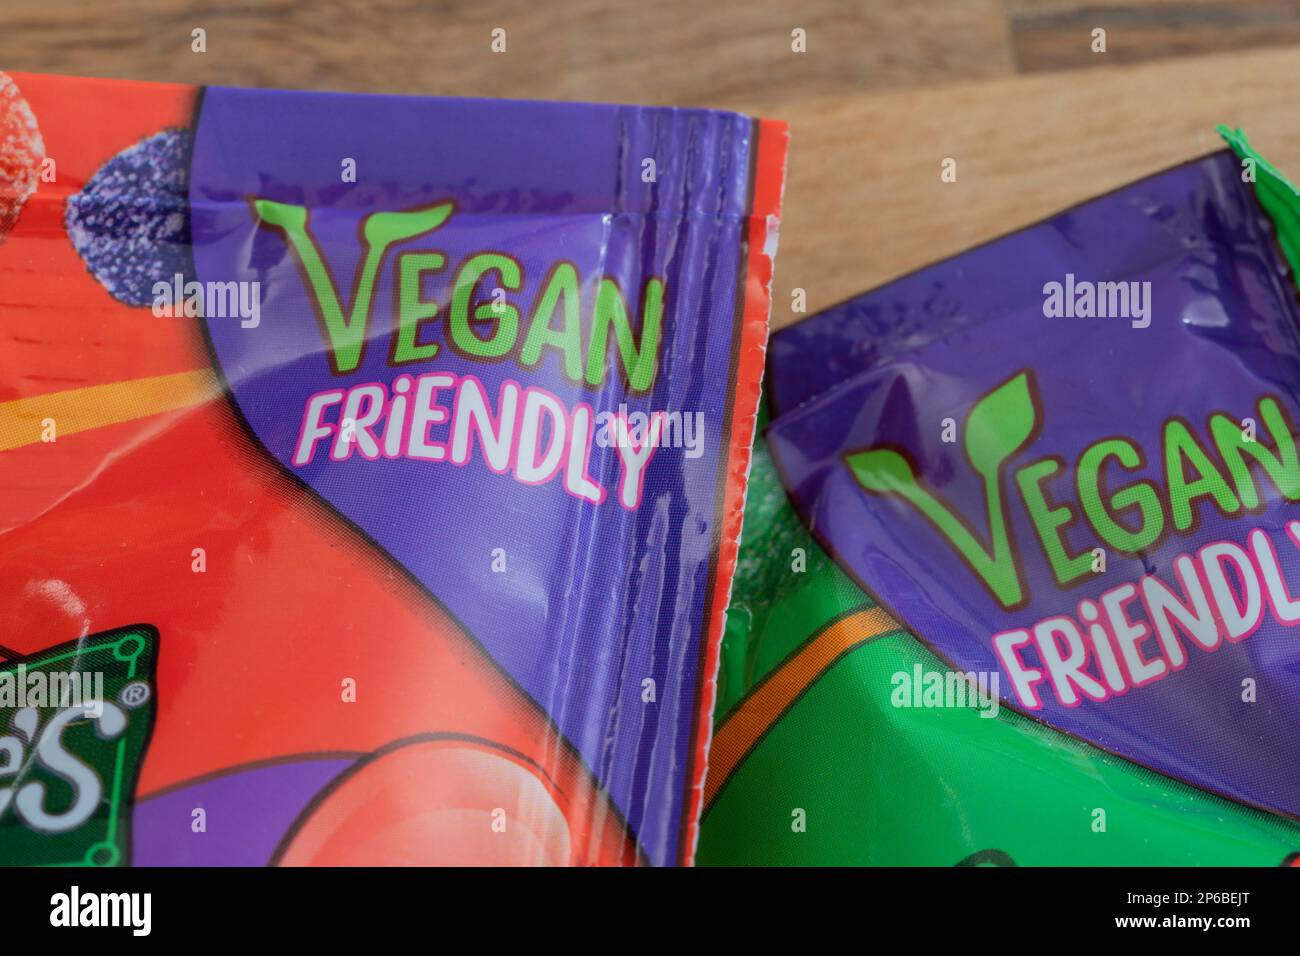 Packets of Rowntrees Fruit Pastilles, now owned by Nestlé, advertising that the sweets are vegan friendly. UK. Concept: suitable for vegans, veganism Stock Photo